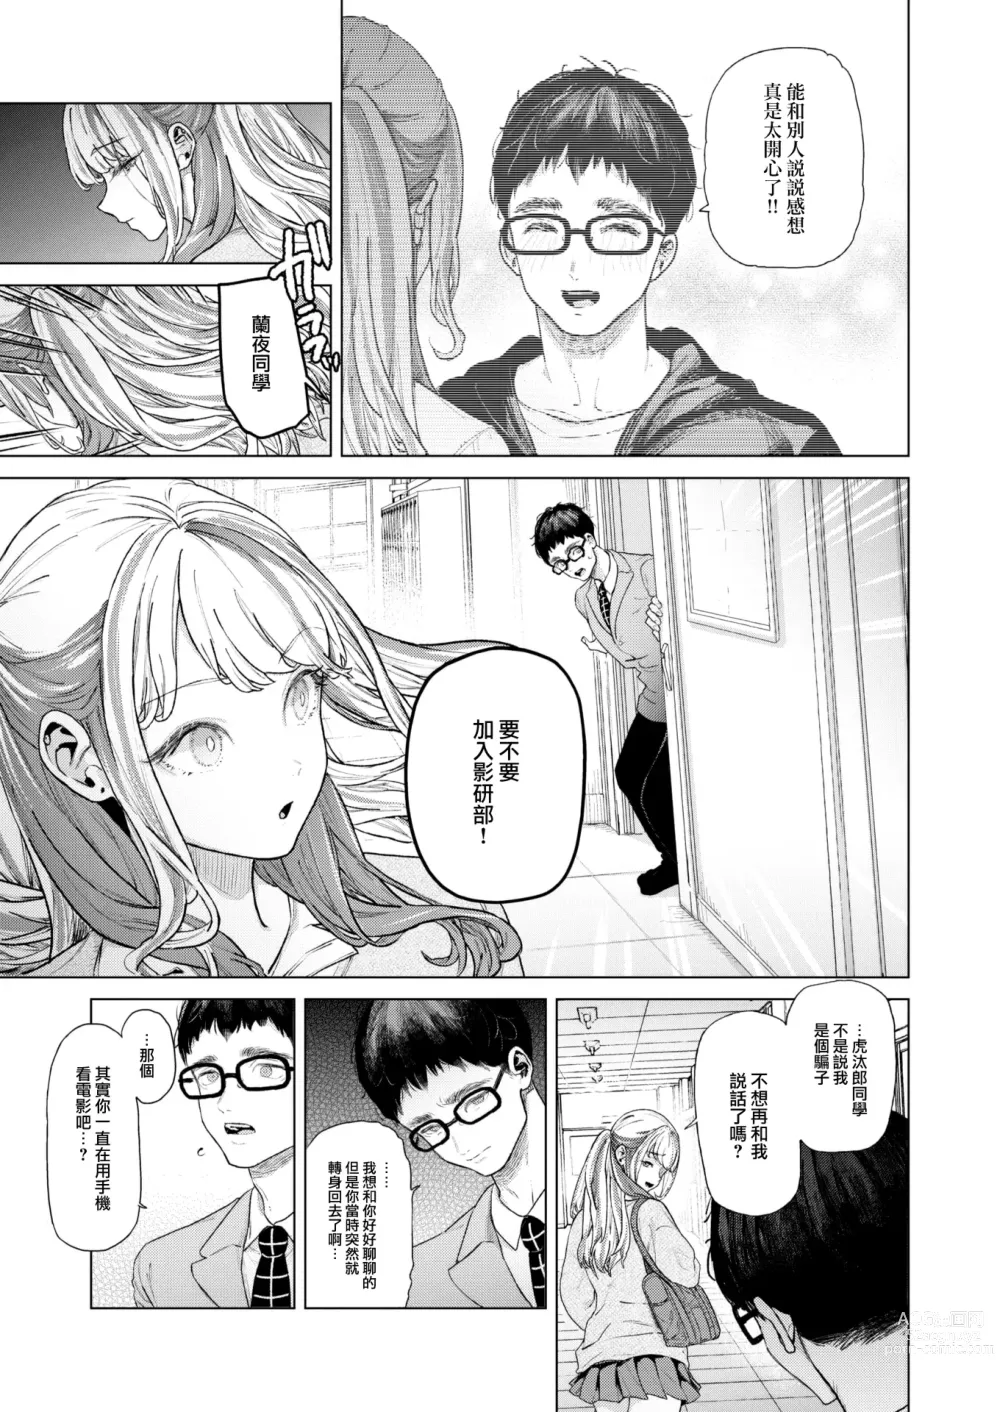 Page 39 of doujinshi movie friend (decensored)